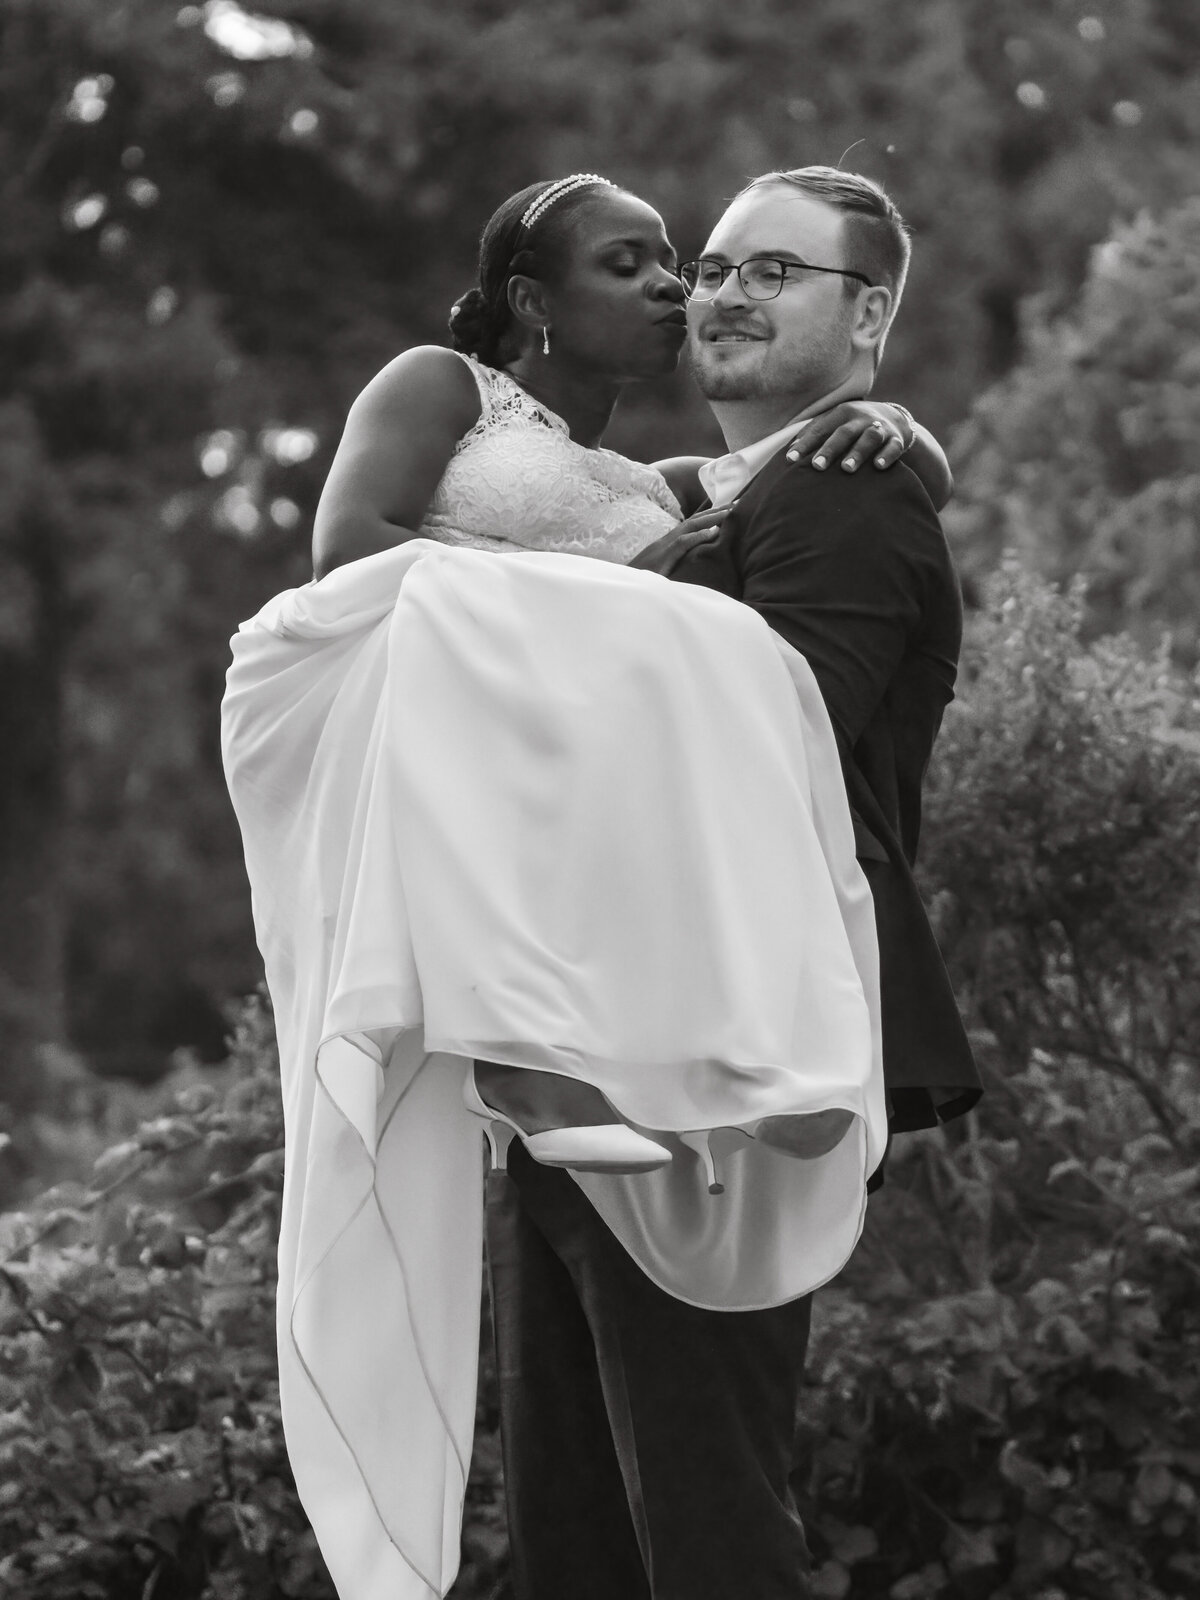 Black and white photo of a romantic moment with bride and groom at their wedding